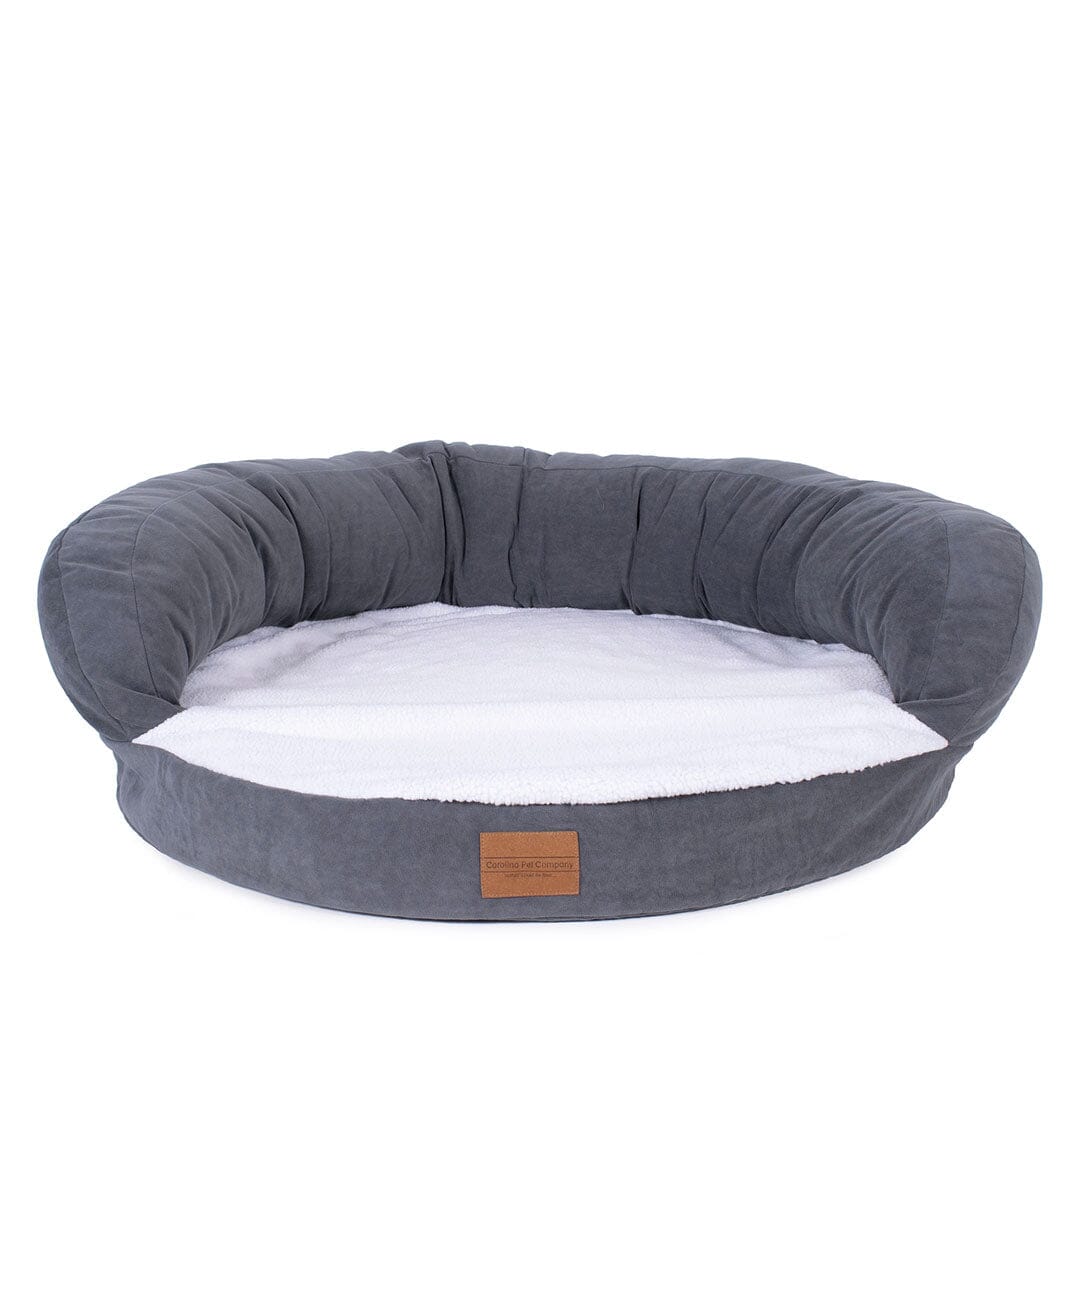 gray orthopedic dog bed with bolster